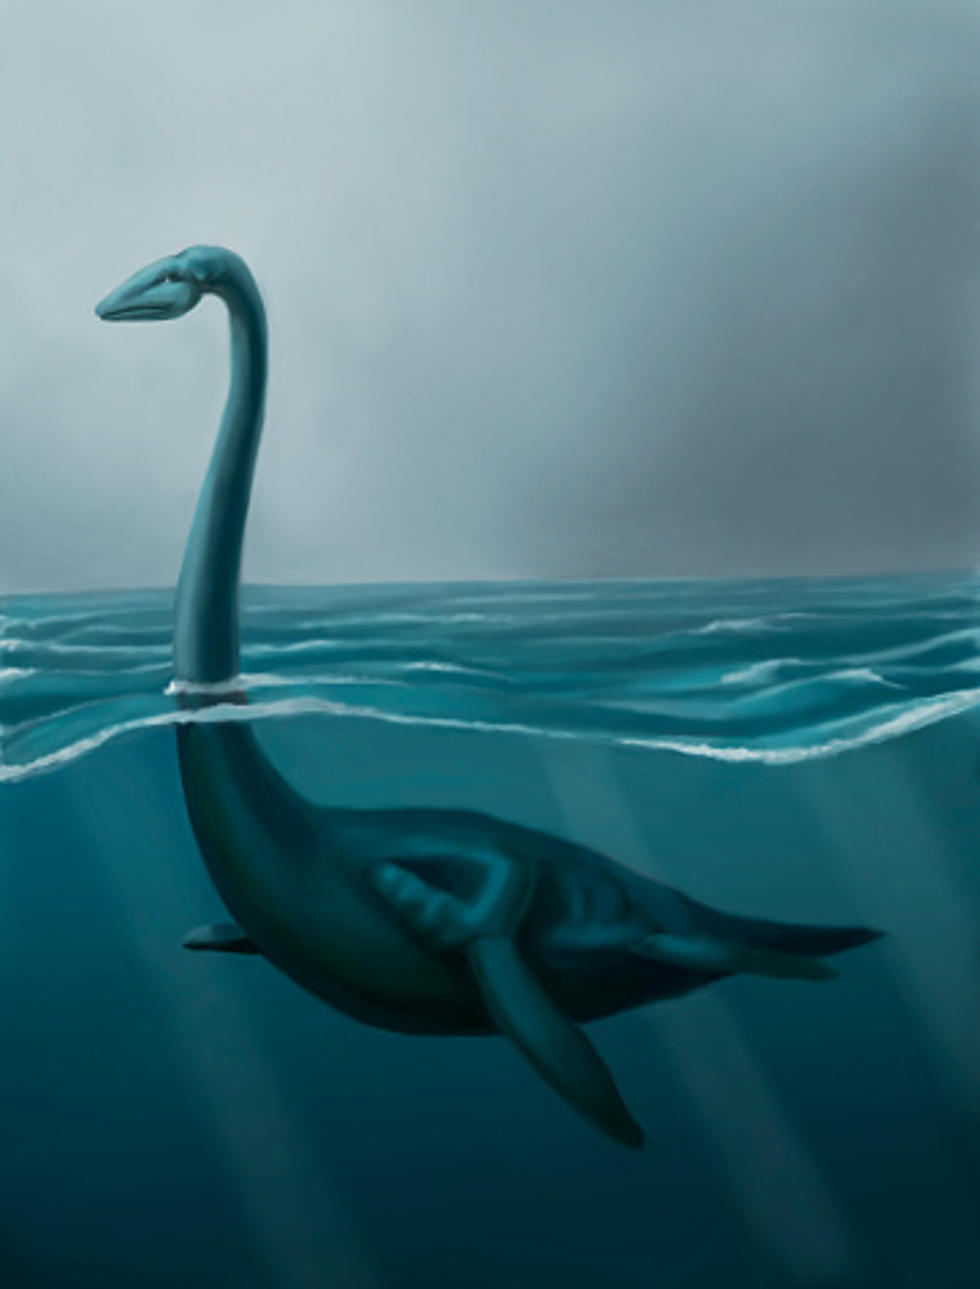 Man Claims To Have 100% Proof Of Lochness Monster